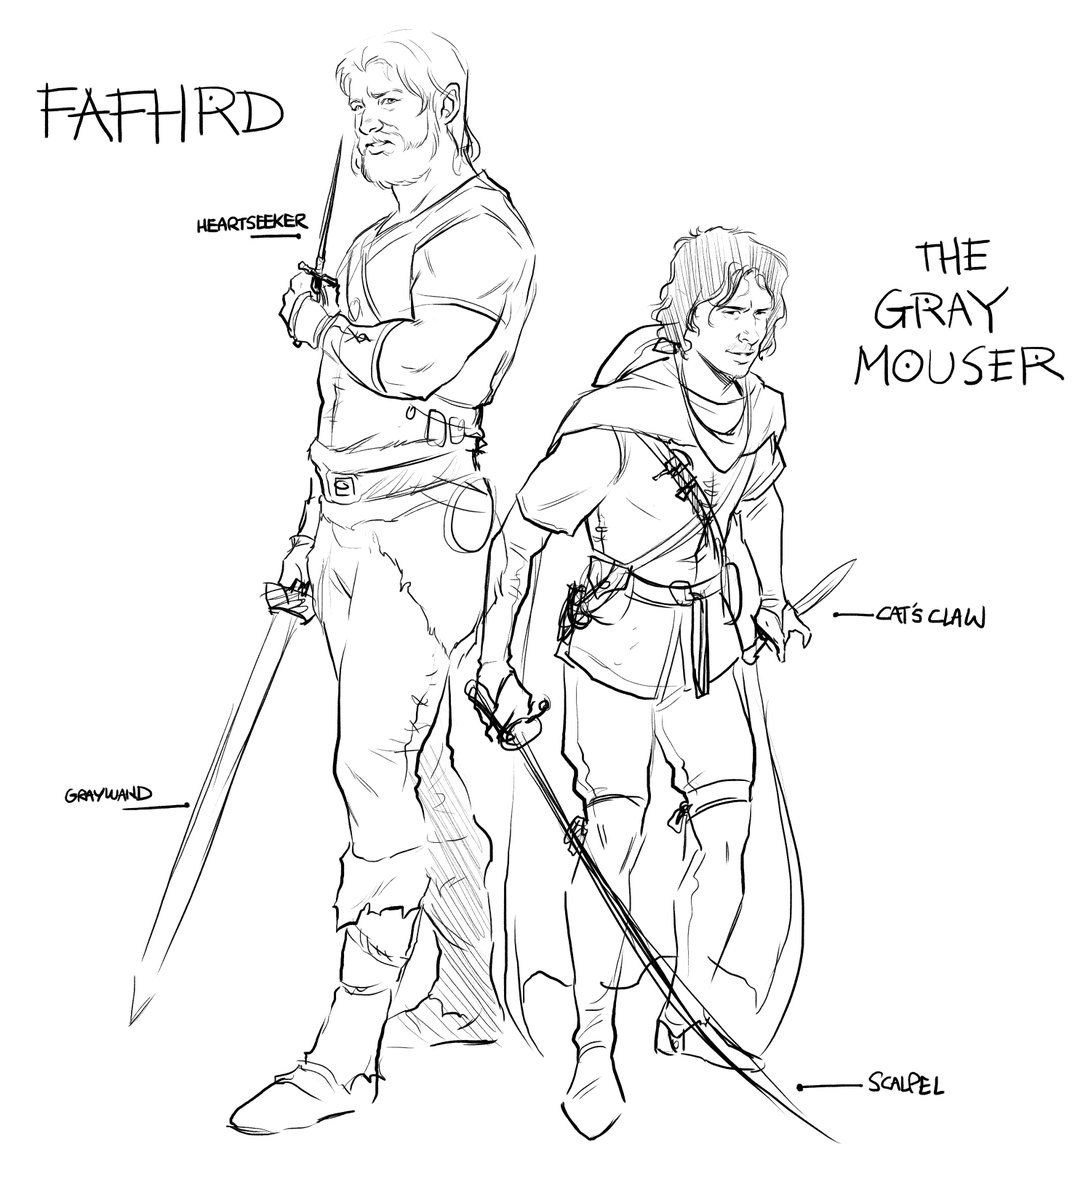 The archetypal rogues themselves, Fafhrd and the Gray Mouser. 

W.I.P. 